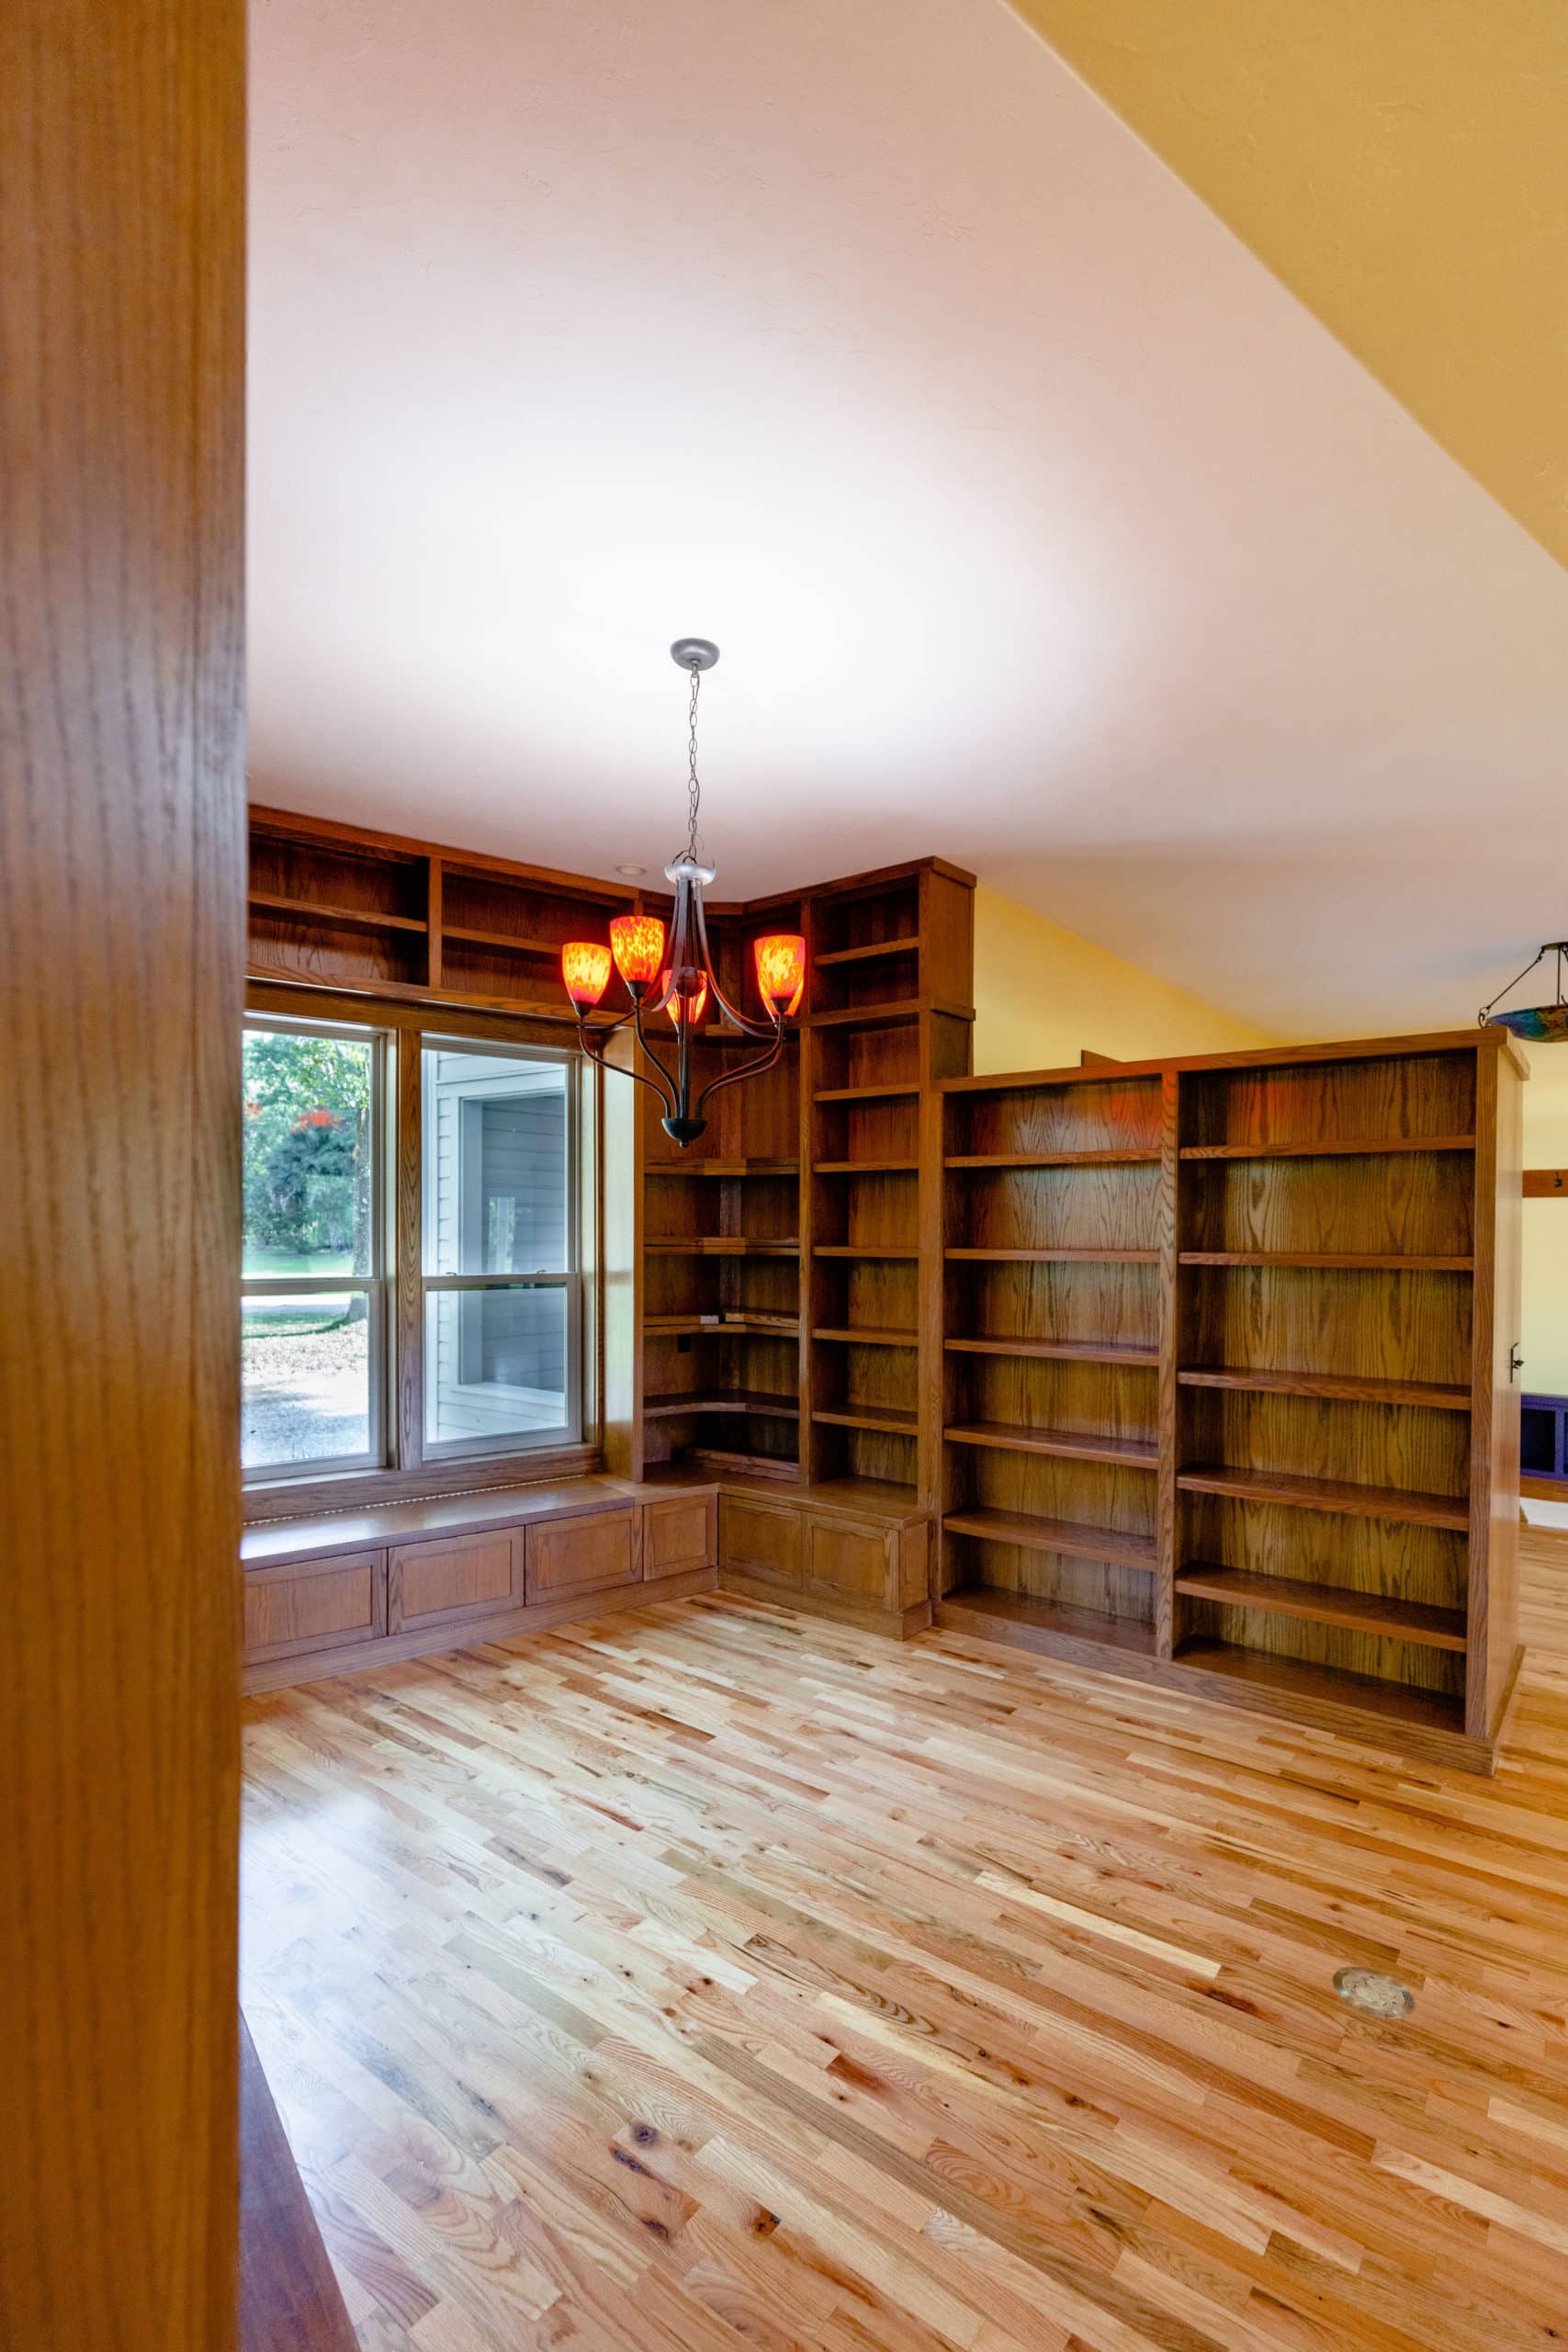 Interior home renovation - Bookshelves with wood flooring and windows.